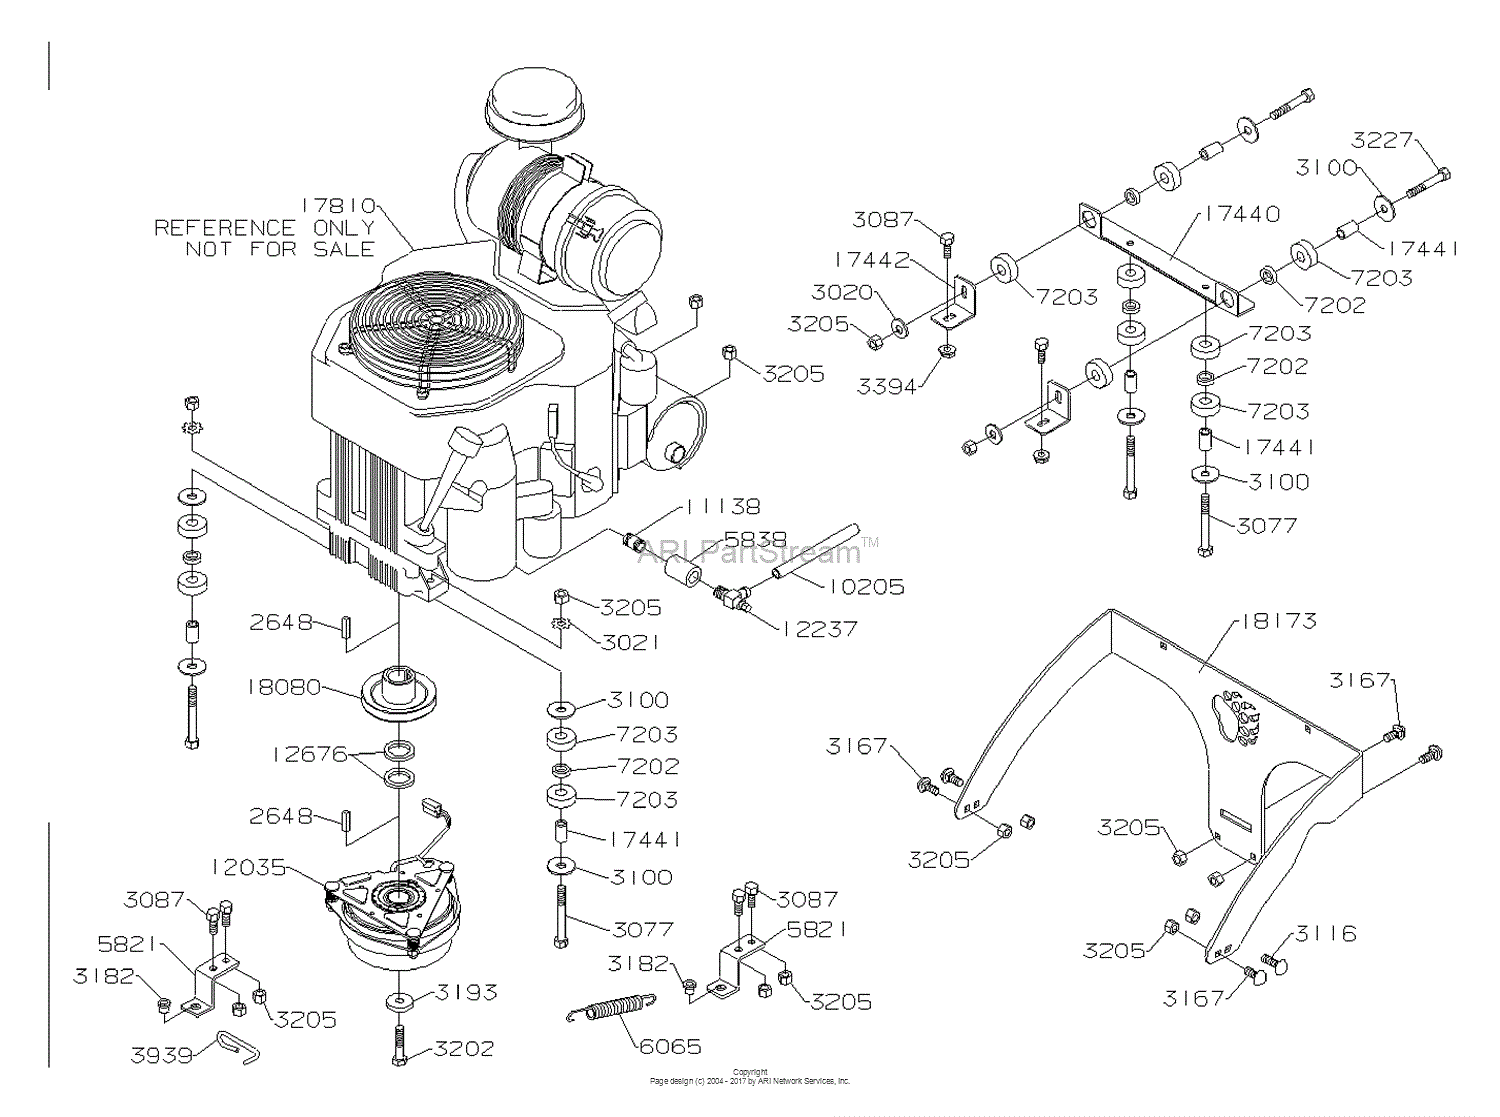 Dixon GRIZZLY 60 (2005) Parts Diagram for ENGINE (KOHLER 25HP) 14 hp briggs and stratton wiring diagram 